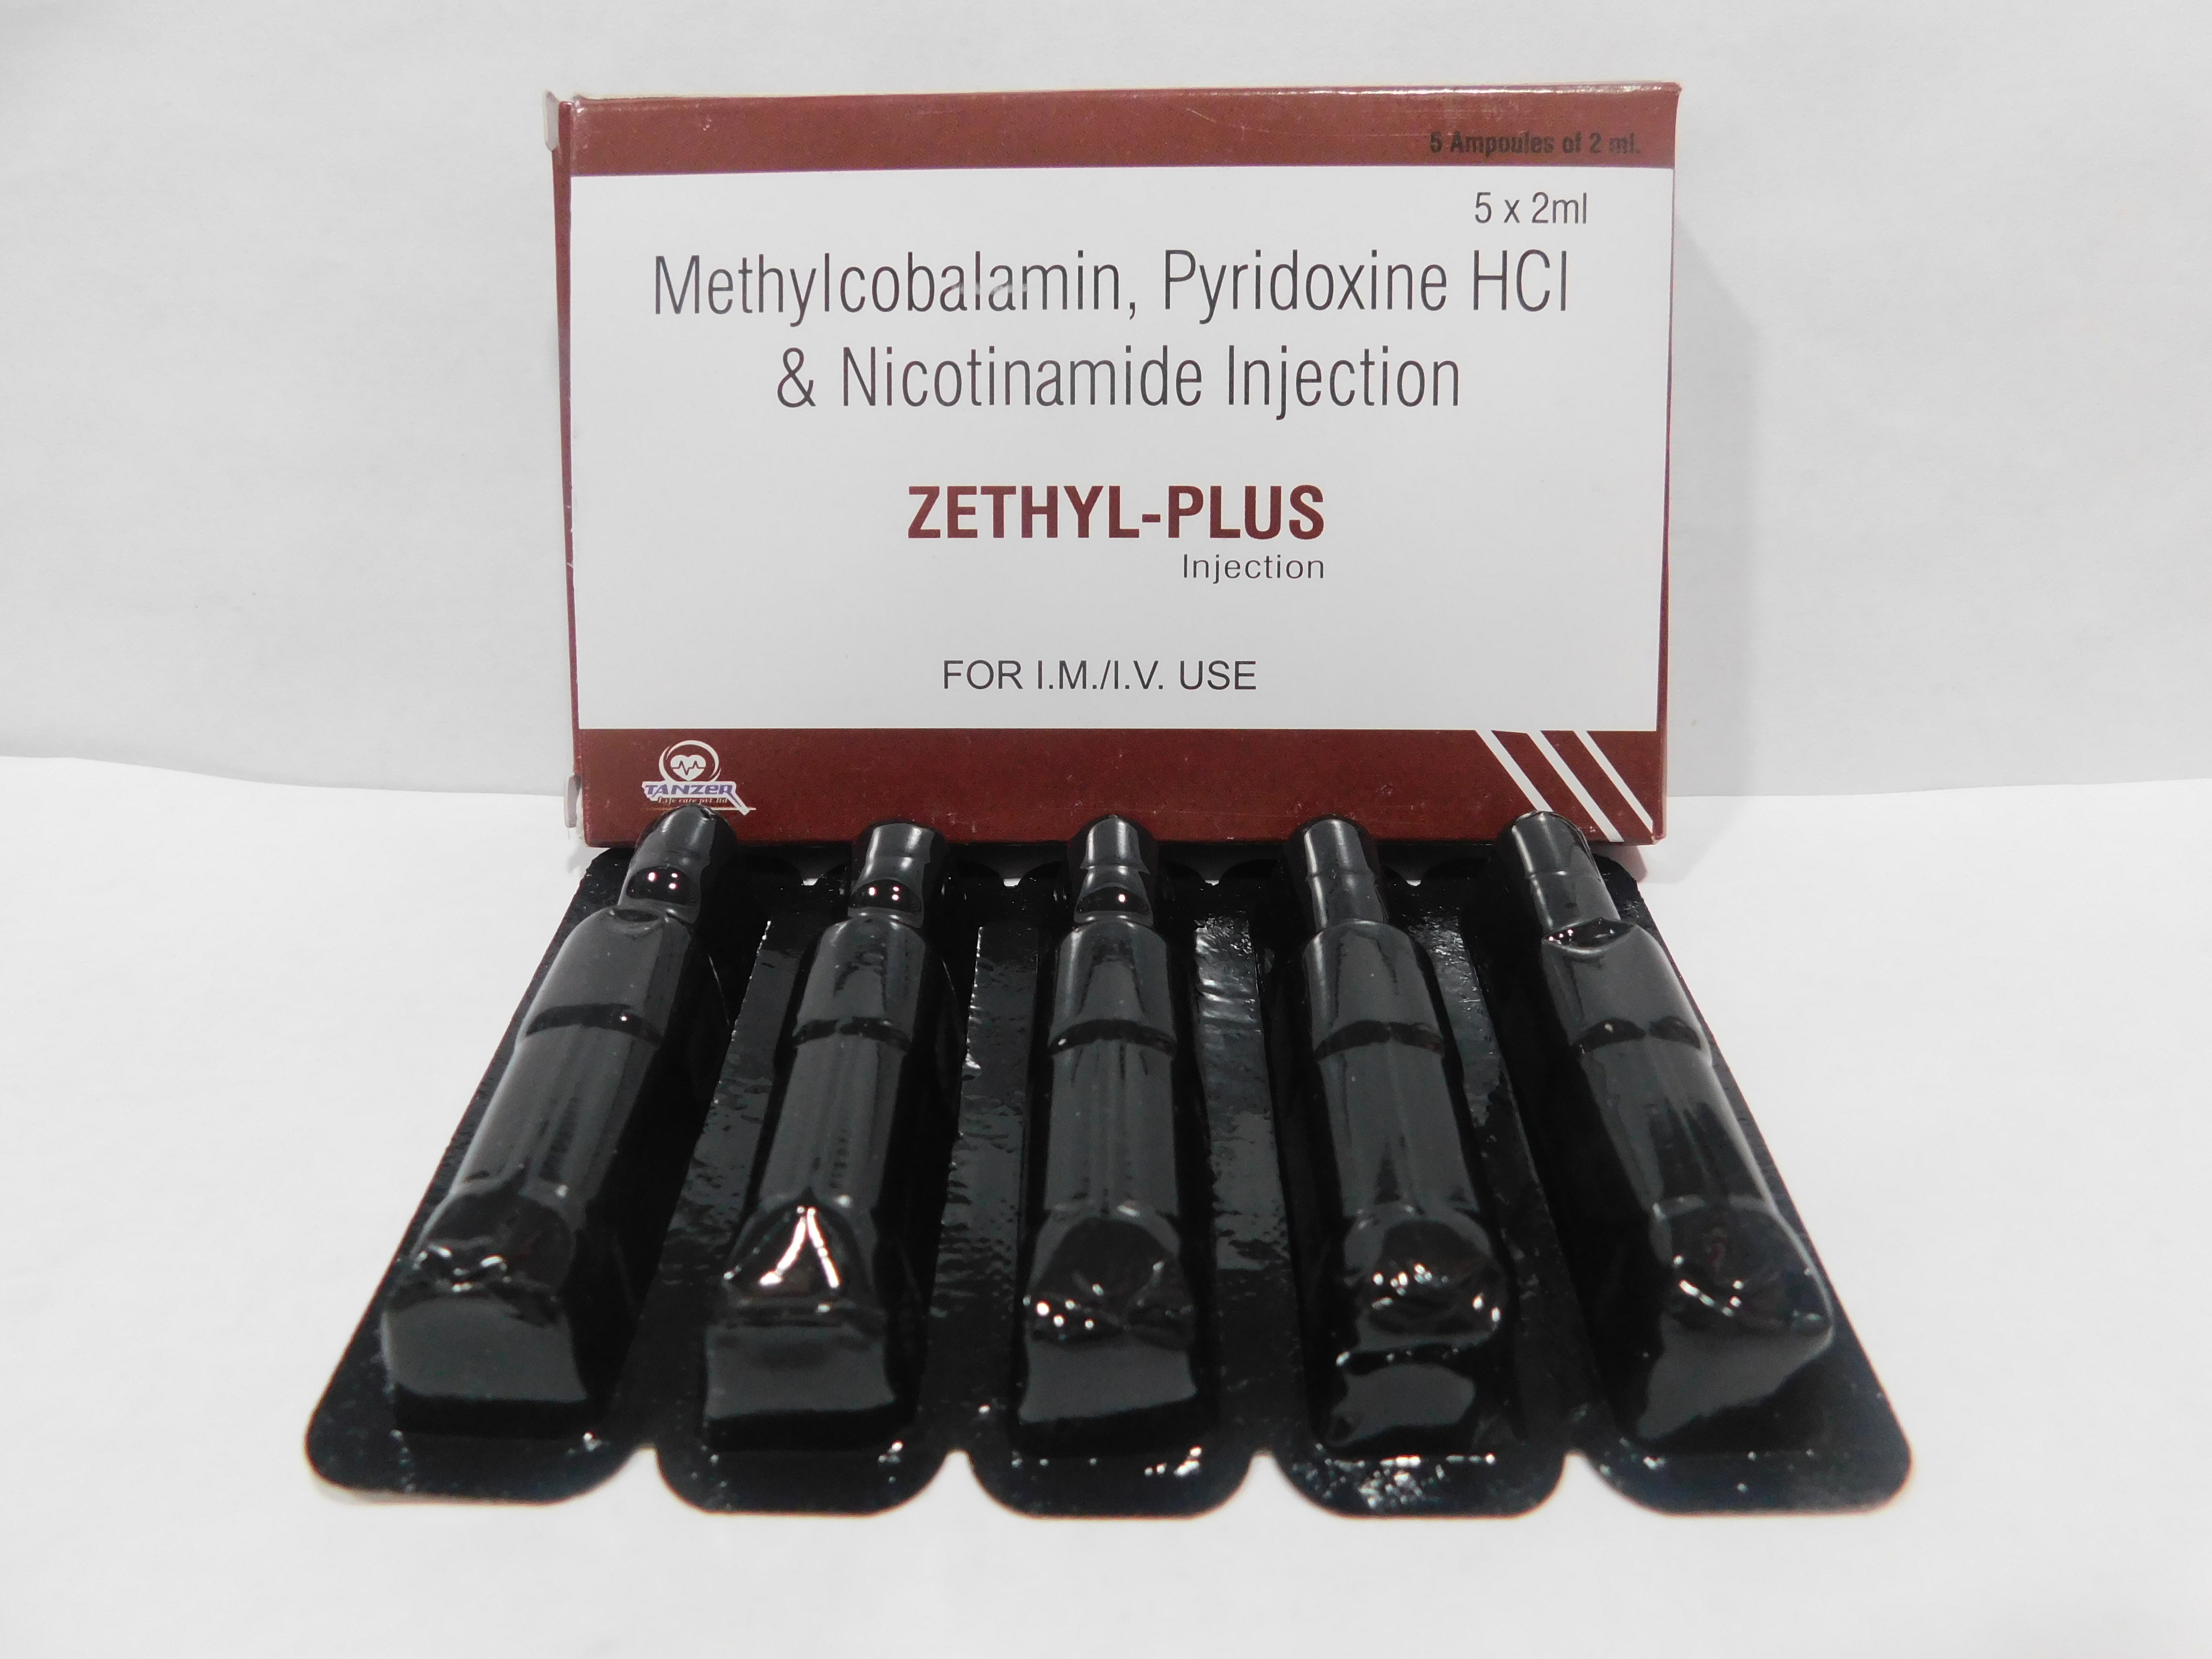 Product Name: ZETHYL PLUS, Compositions of ZETHYL PLUS are Methylcobalamin ,Prodoxine HCL & Nicotinamide Injection - Tanzer Lifecare Private Limited